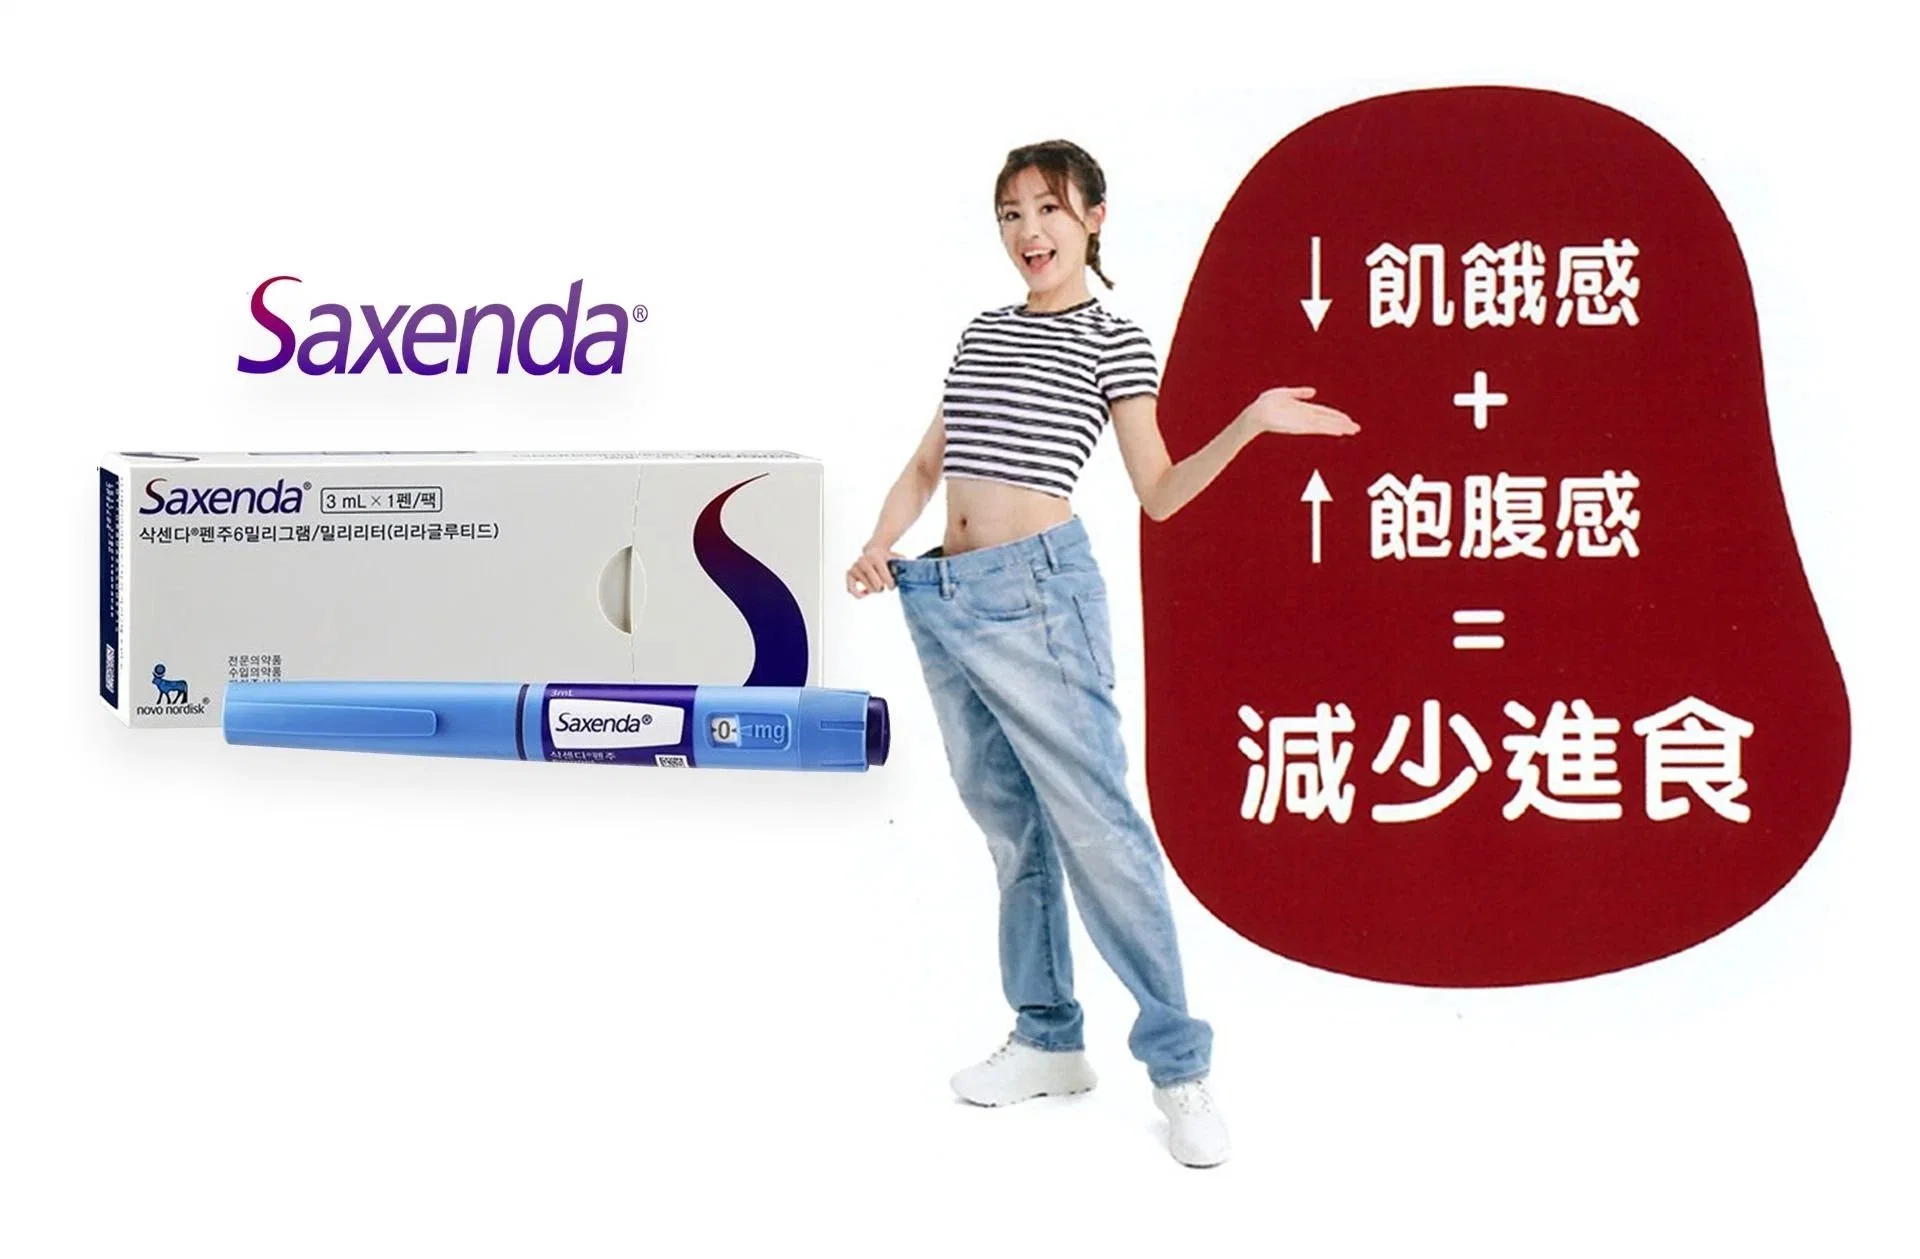 FDA Approved Hot Selling Korea Saxena Pen Lipo Lab Slimming Solution Fat Dissolving Lipolysis Injection for Liquid Lipolab Melting Fat Weight Loss